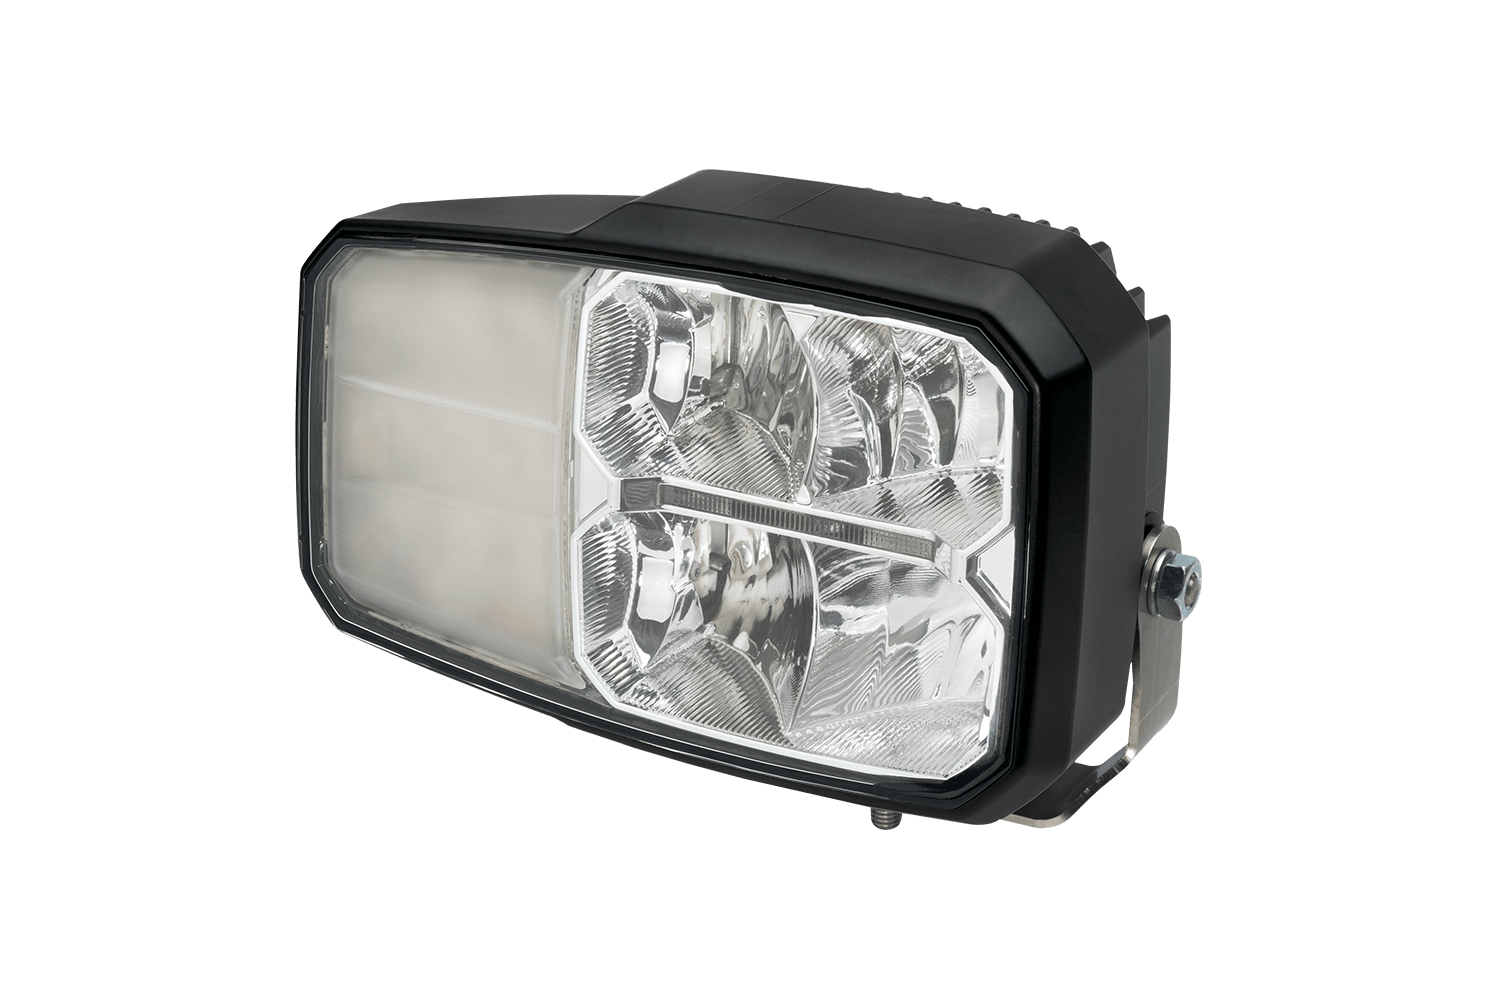 C140 LED combination headlamp from Hella offered by Patlon in Canada